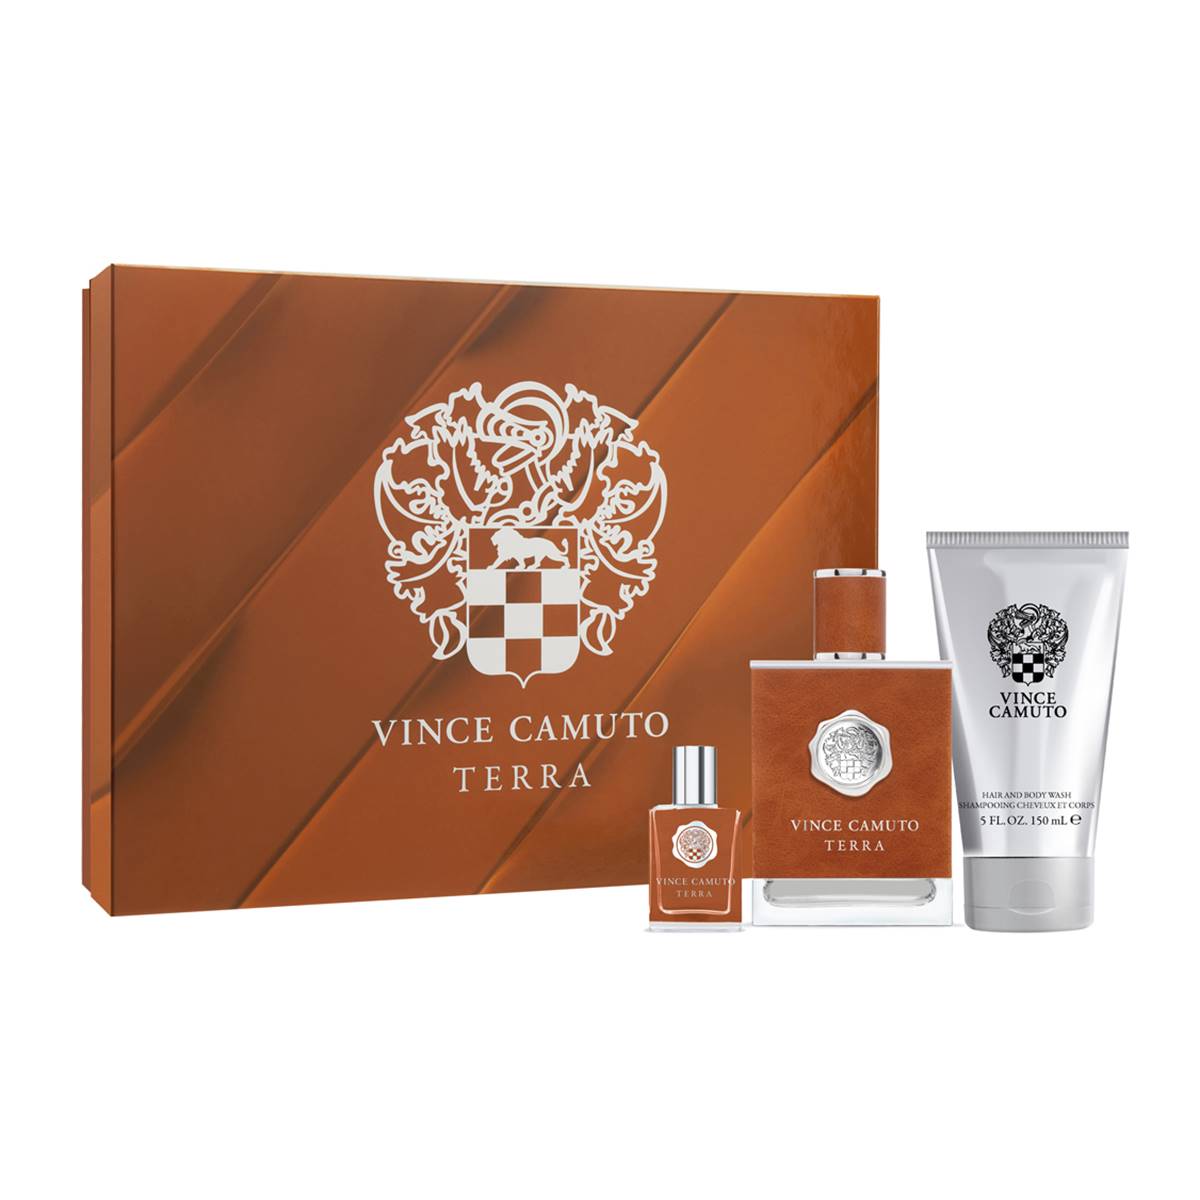 Vince Camuto Terra 3pc. Cologne Gift Set - Value $139.00